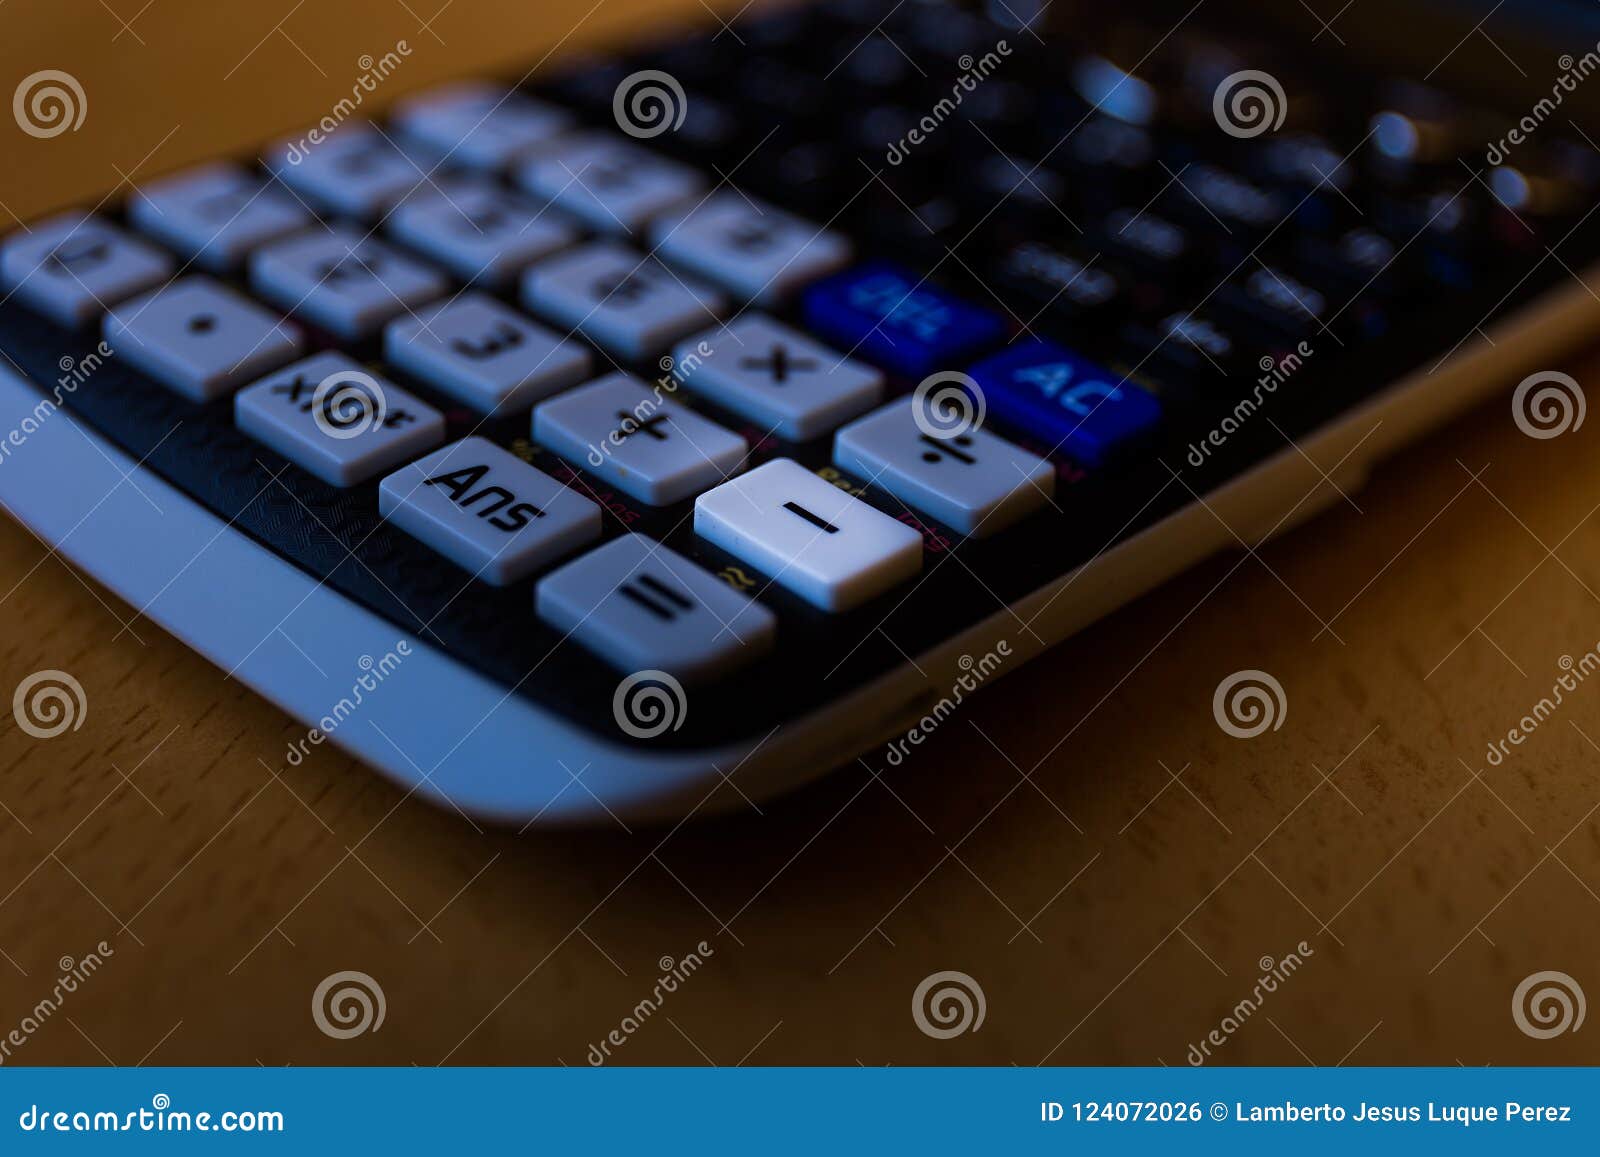 Subtract Key From The Keyboard Of A Scientific Calculator Royalty Free